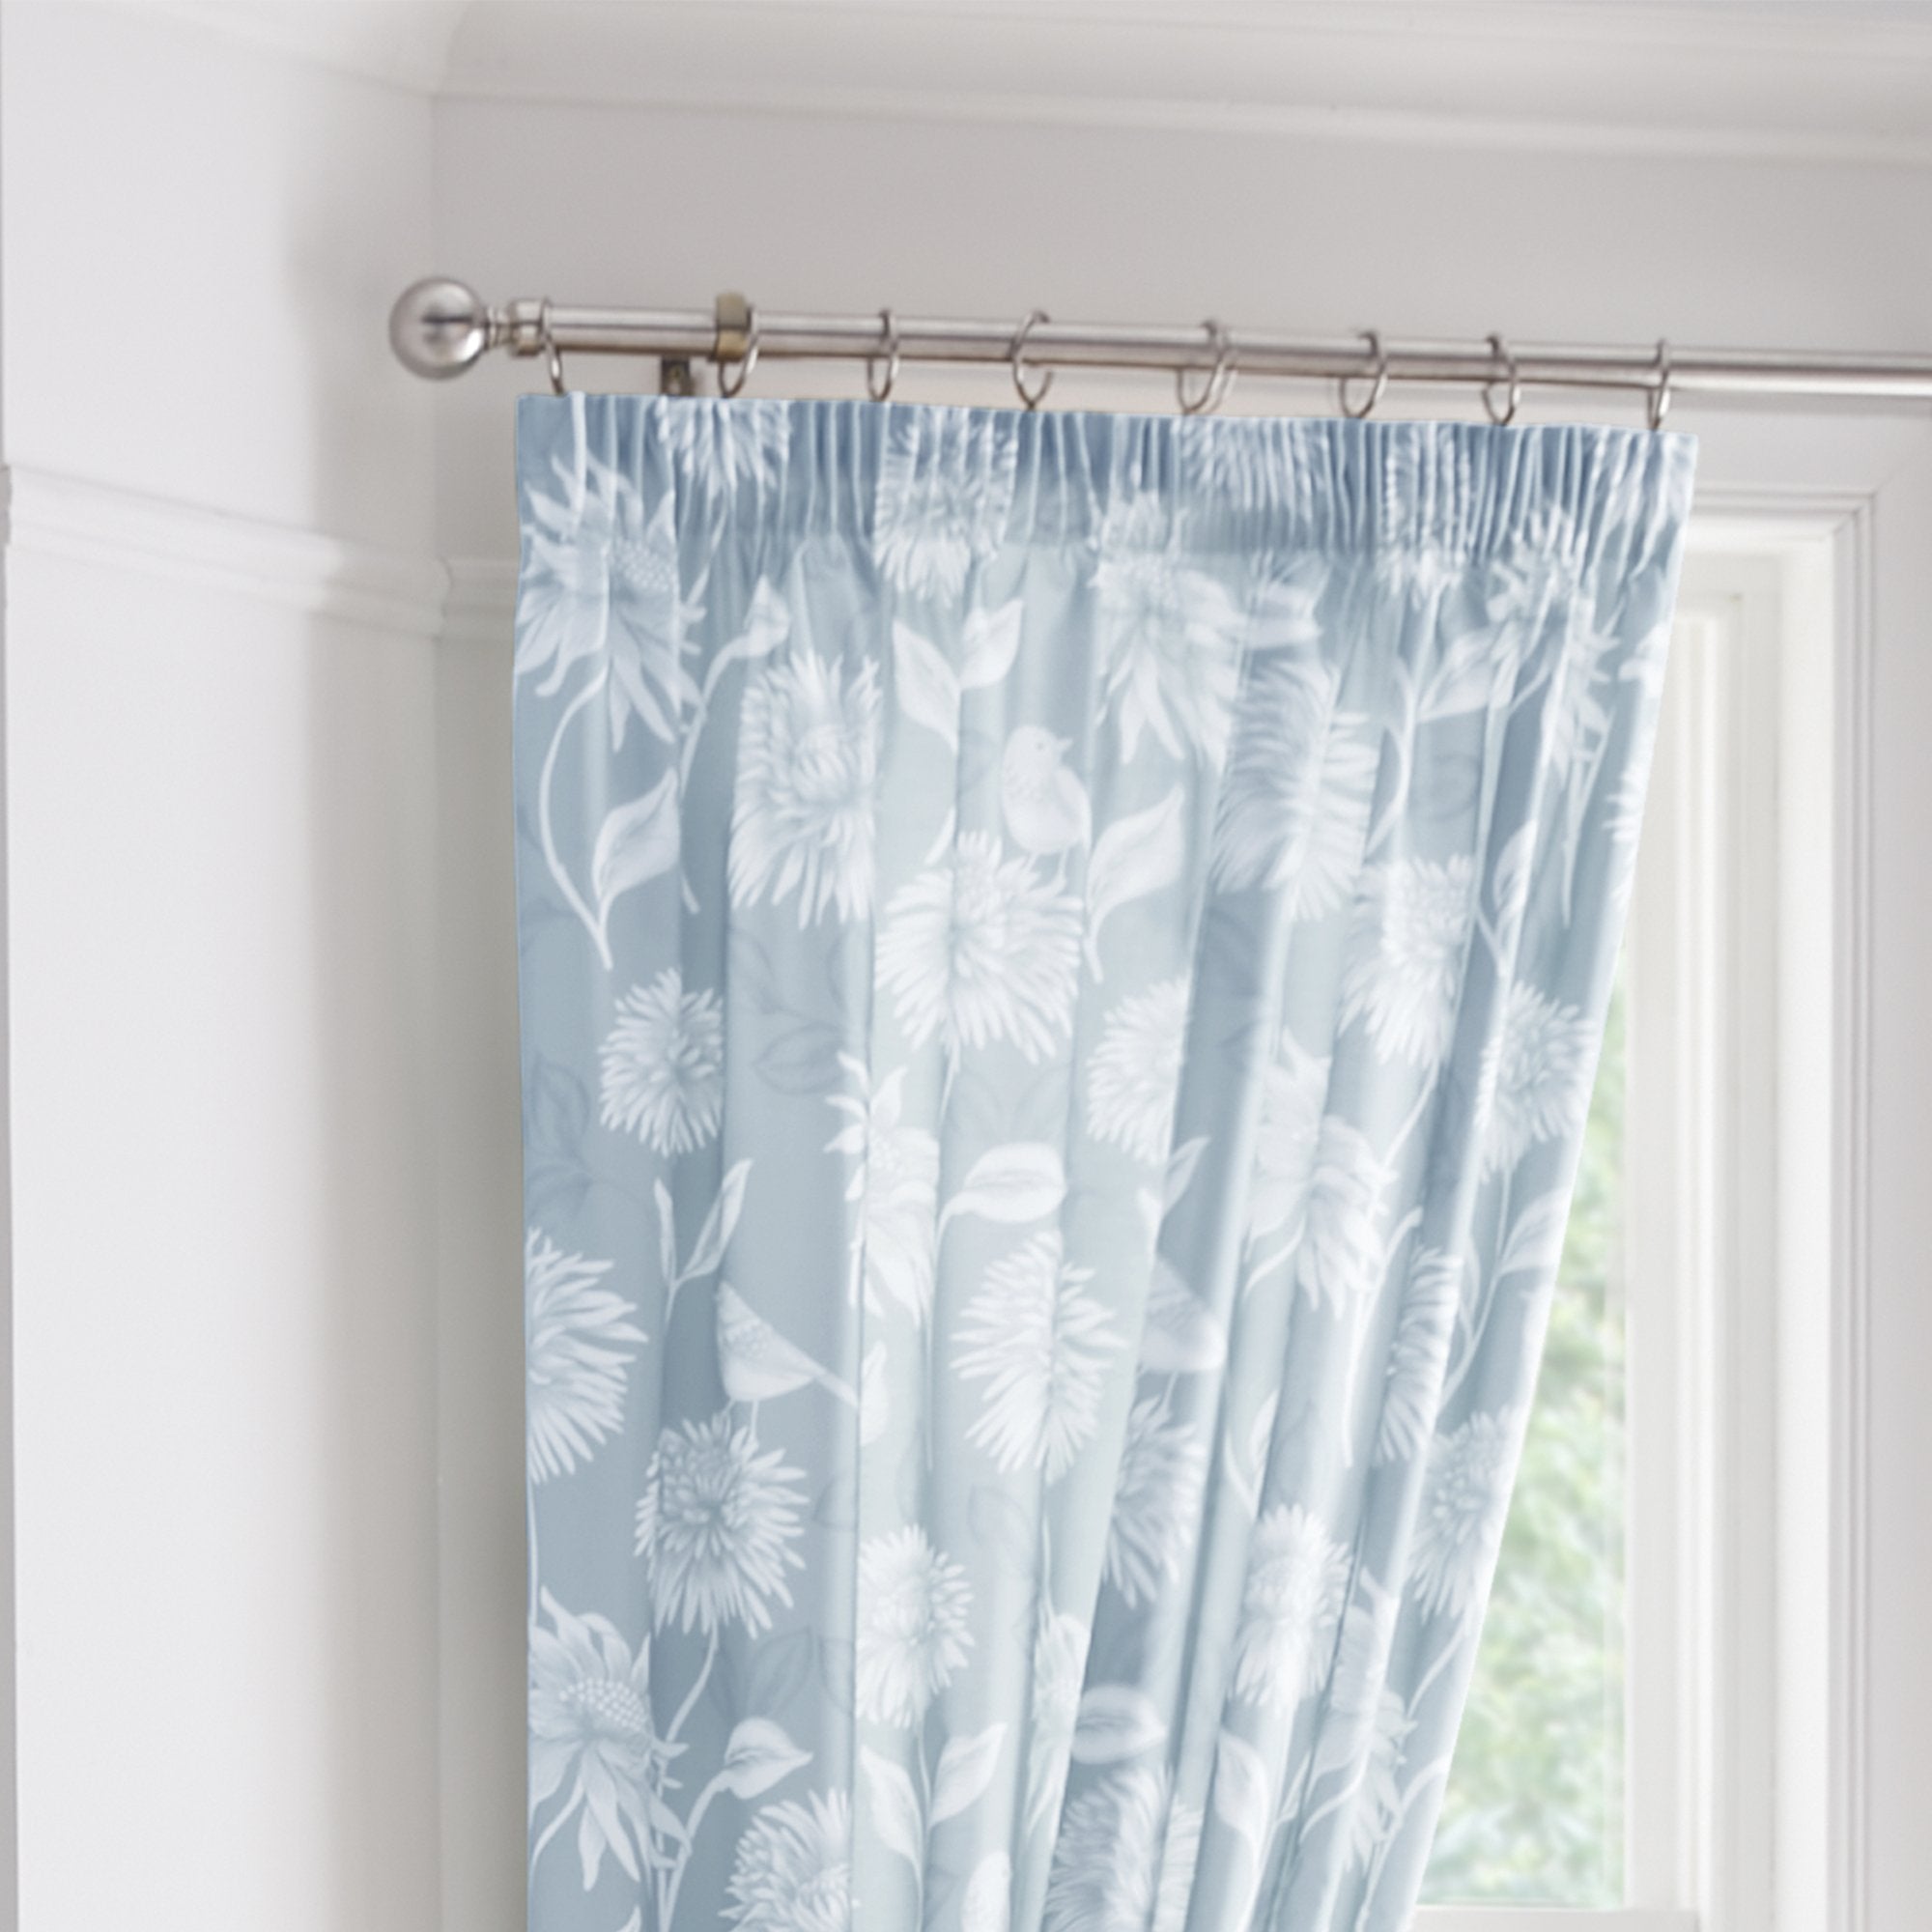 Pair of Pencil Pleat Curtains With Tie-Backs Chrysanthemum by Dreams & Drapes Design in Blue